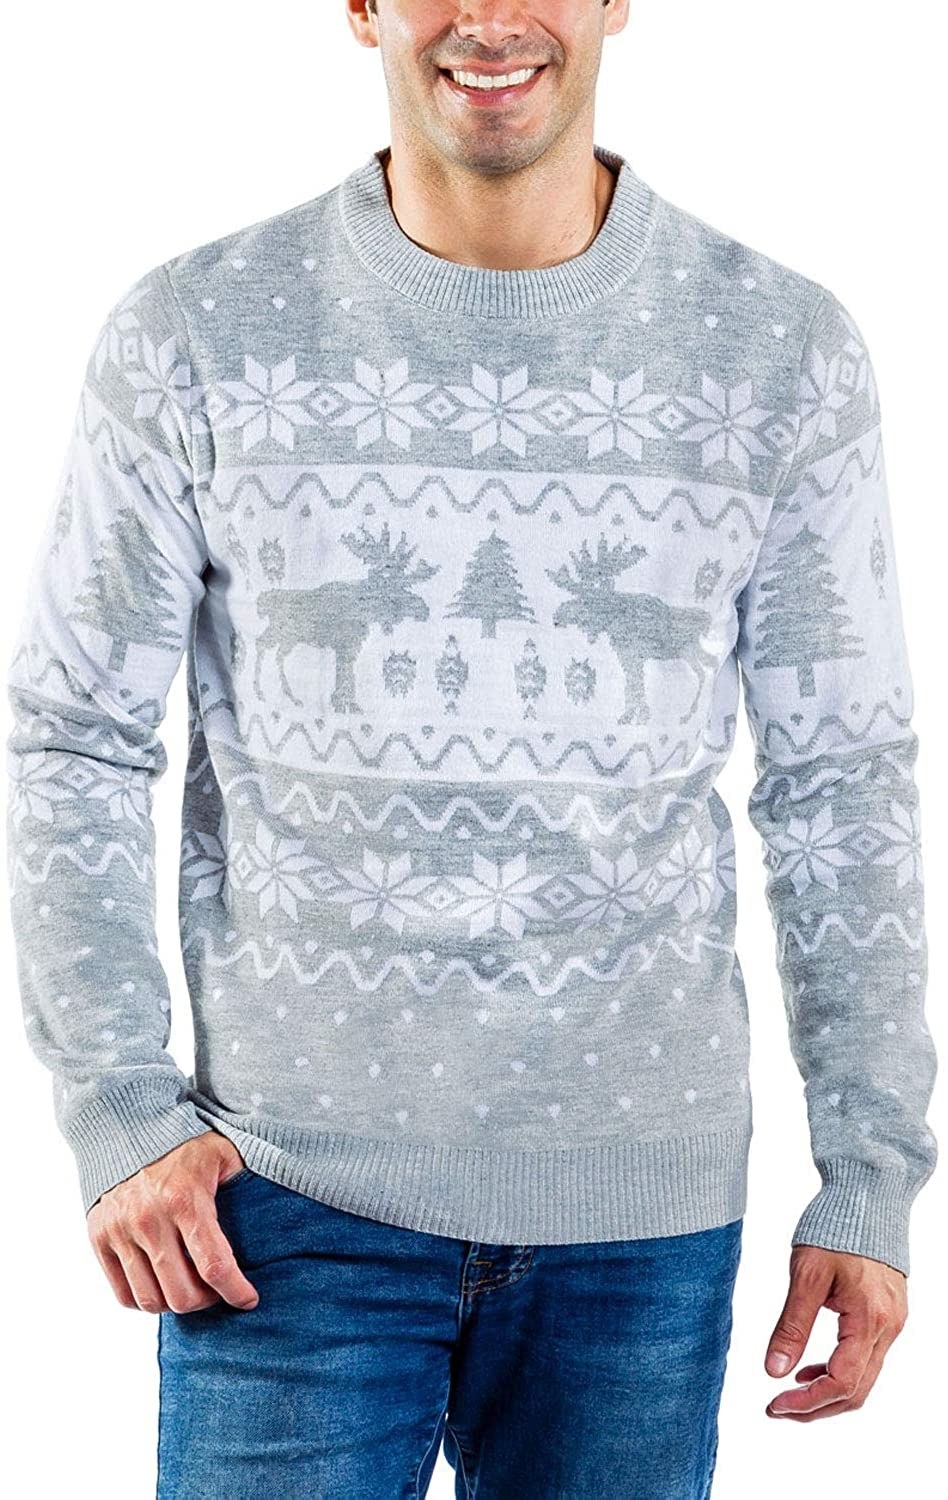 Model wearing gray and white Christmas sweater